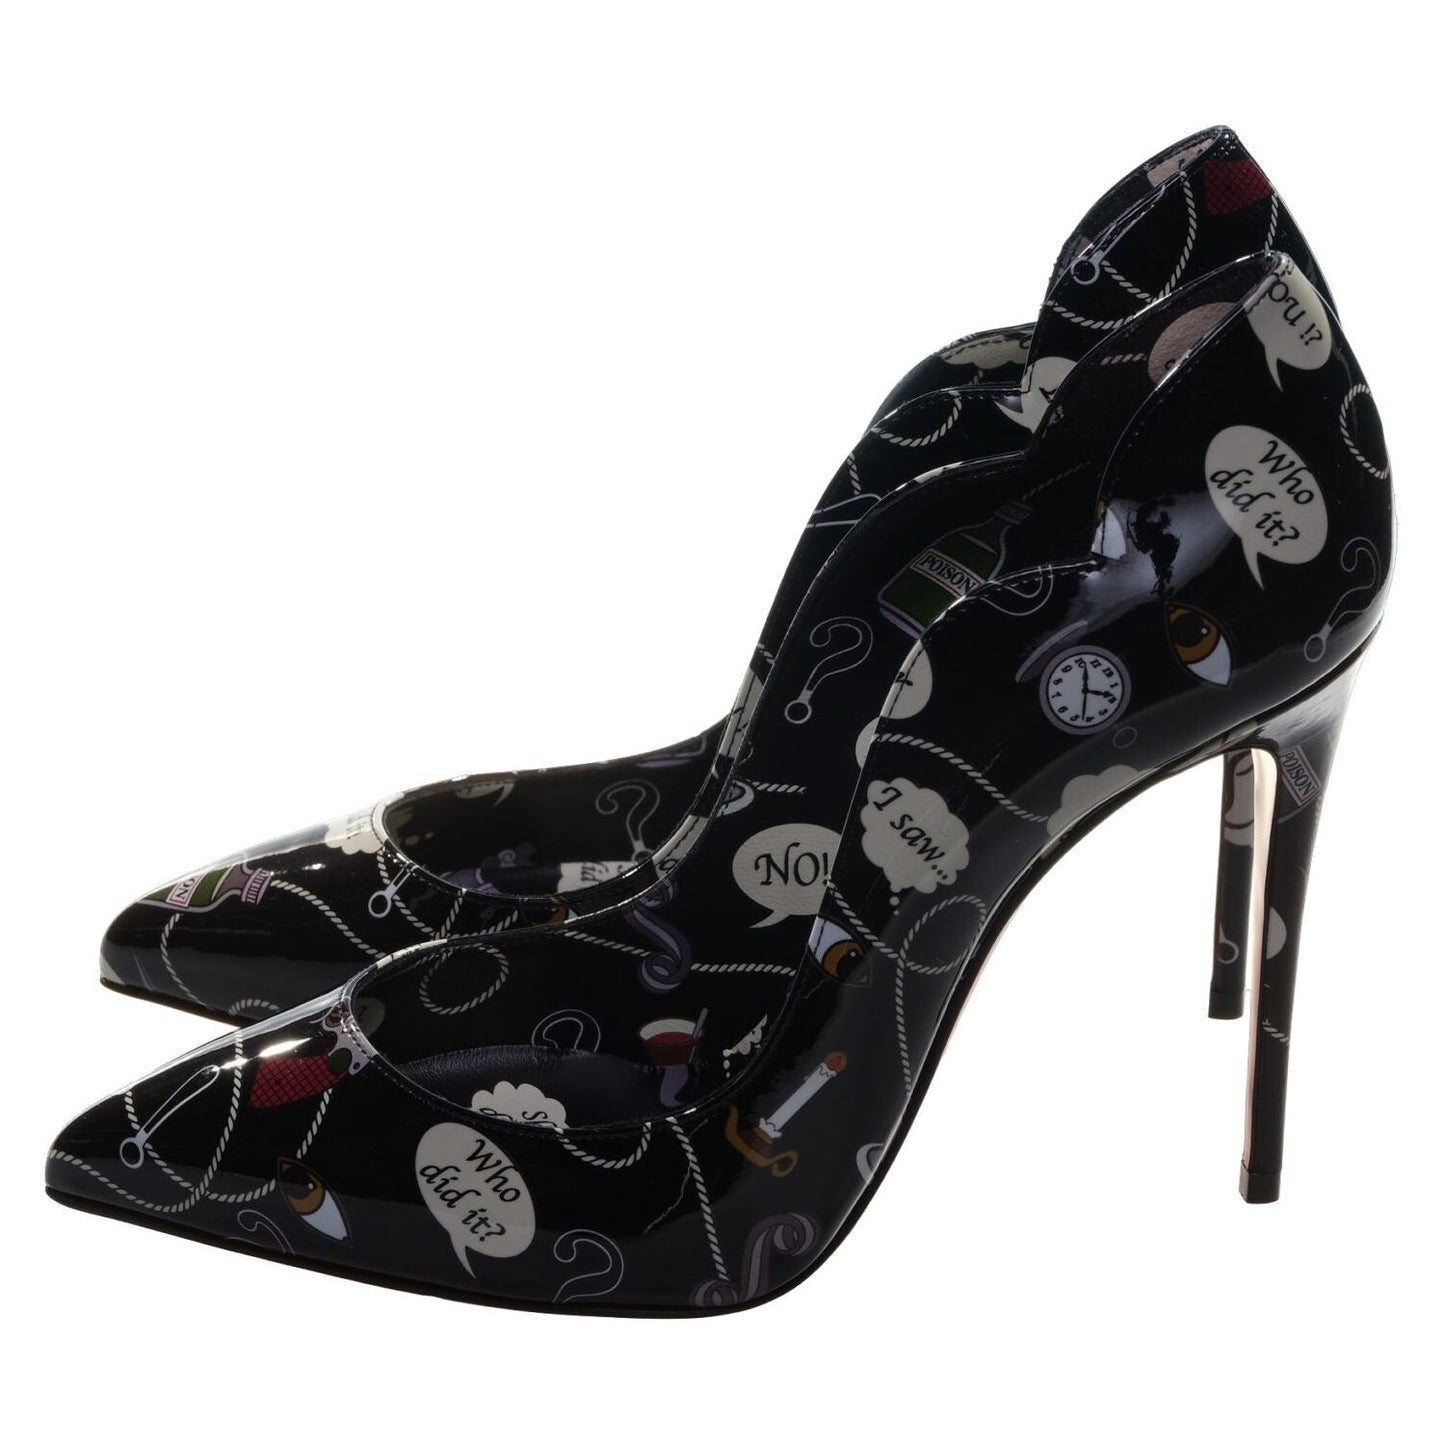 Hot Chick 100 Black Weapons Print Patent Leather High Heel Pumps